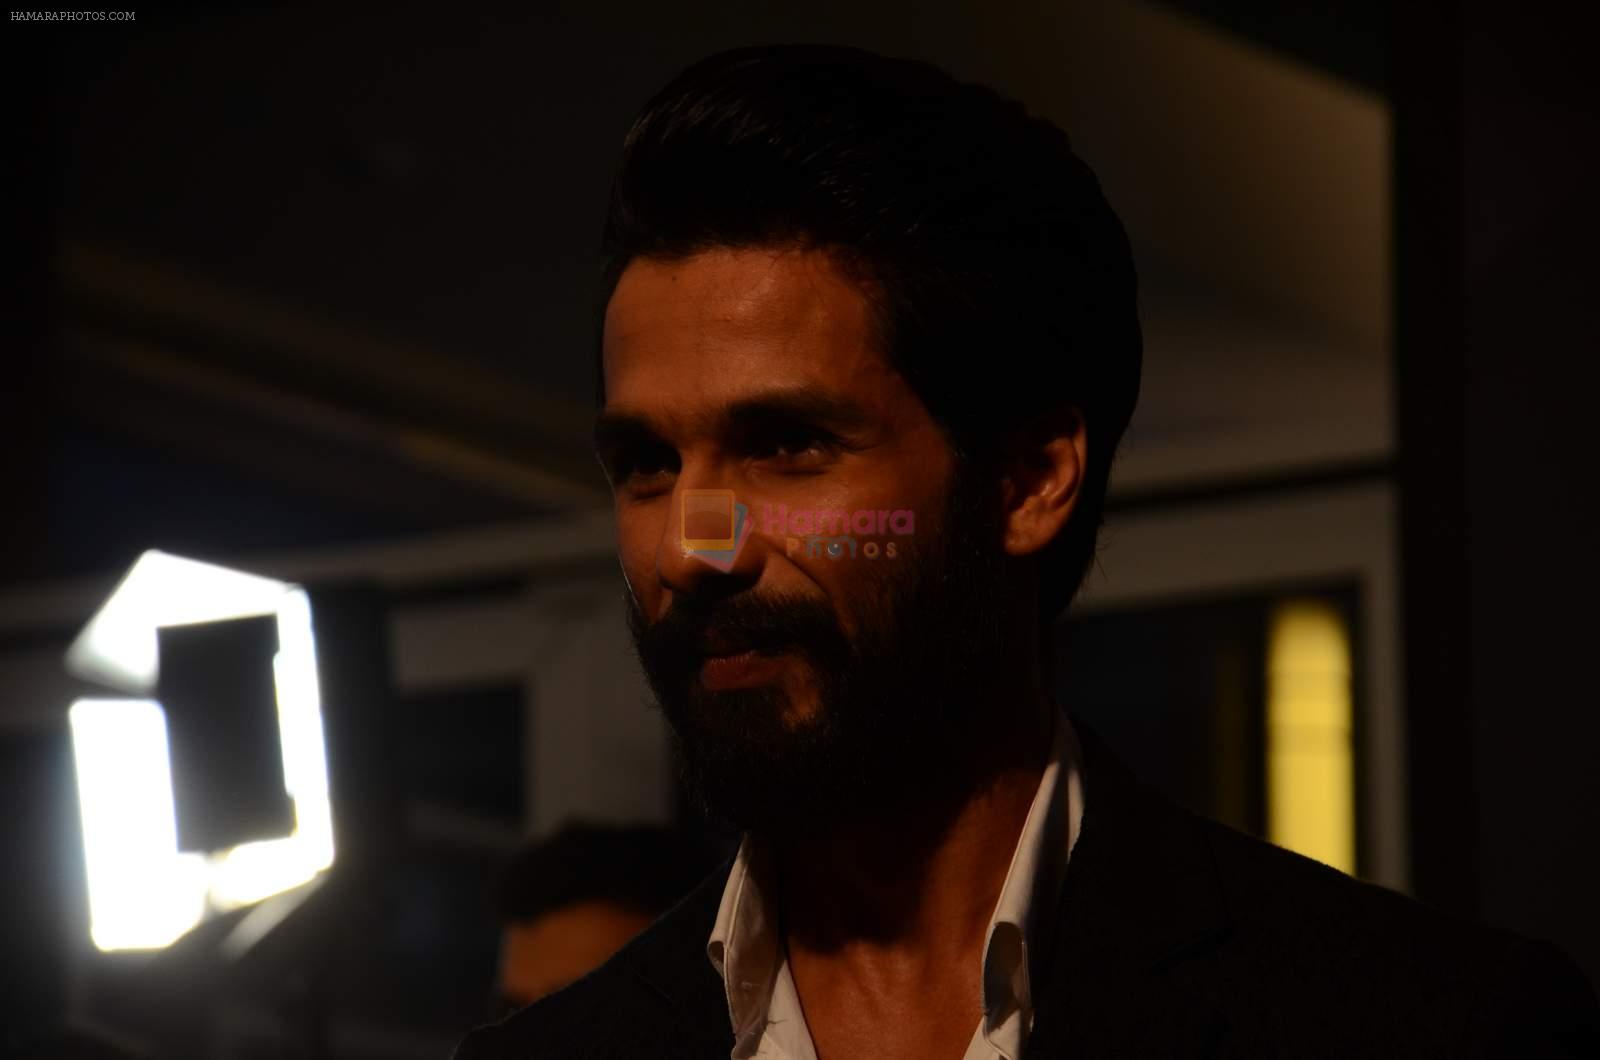 Shahid Kapoor at GQ men of the year 2015 on 26th Sept 2015